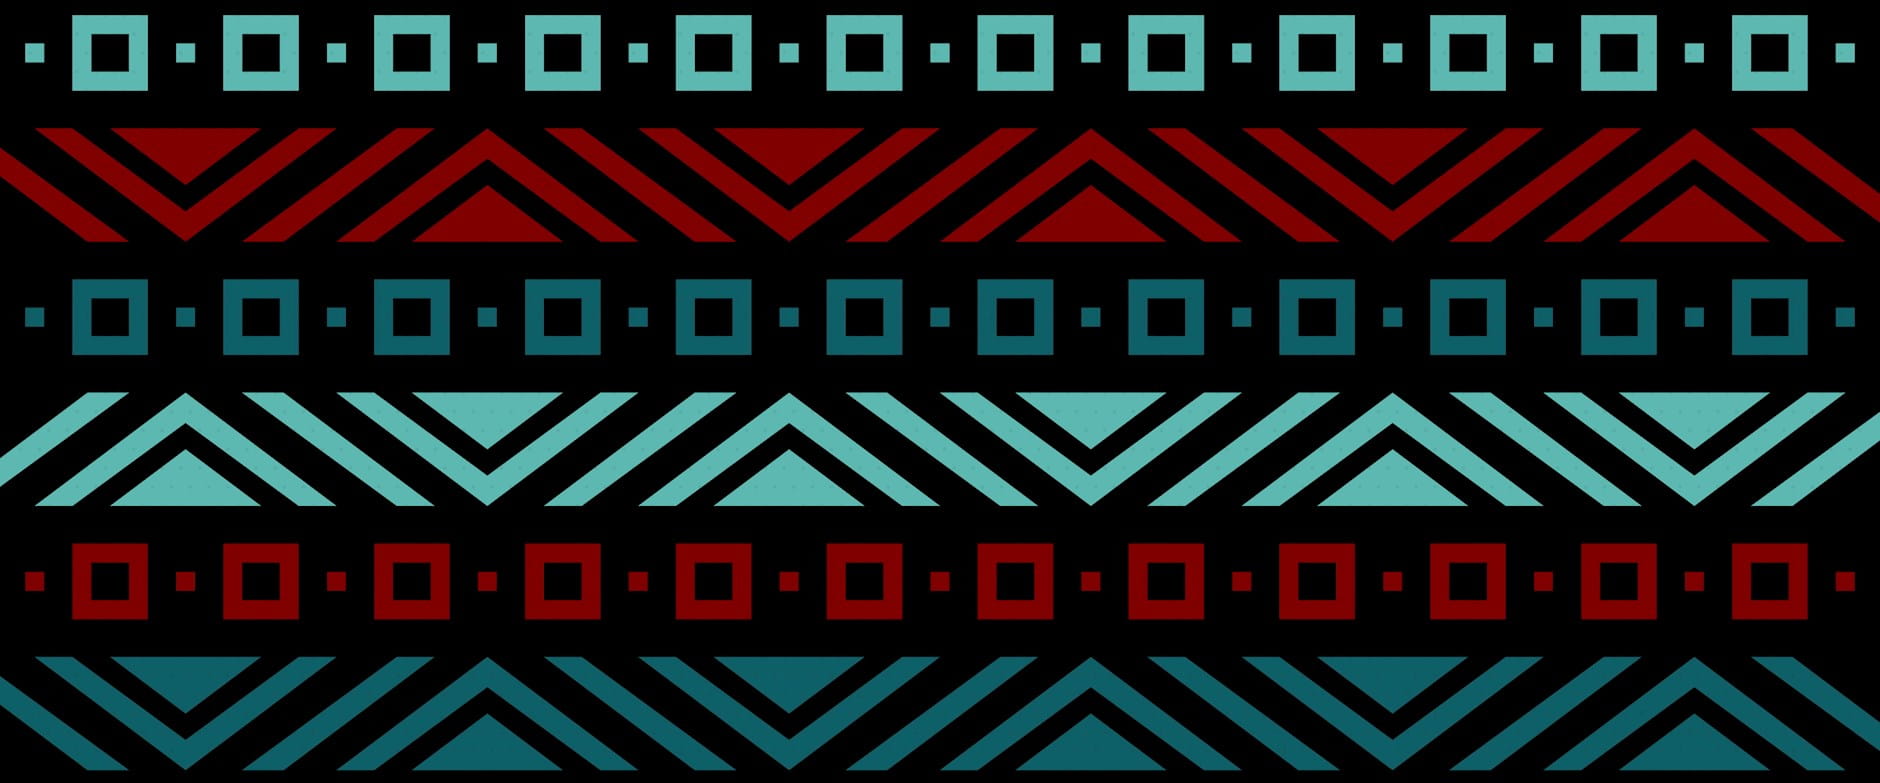 Colorful pattern of shapes in Chicago Booth's red and teal